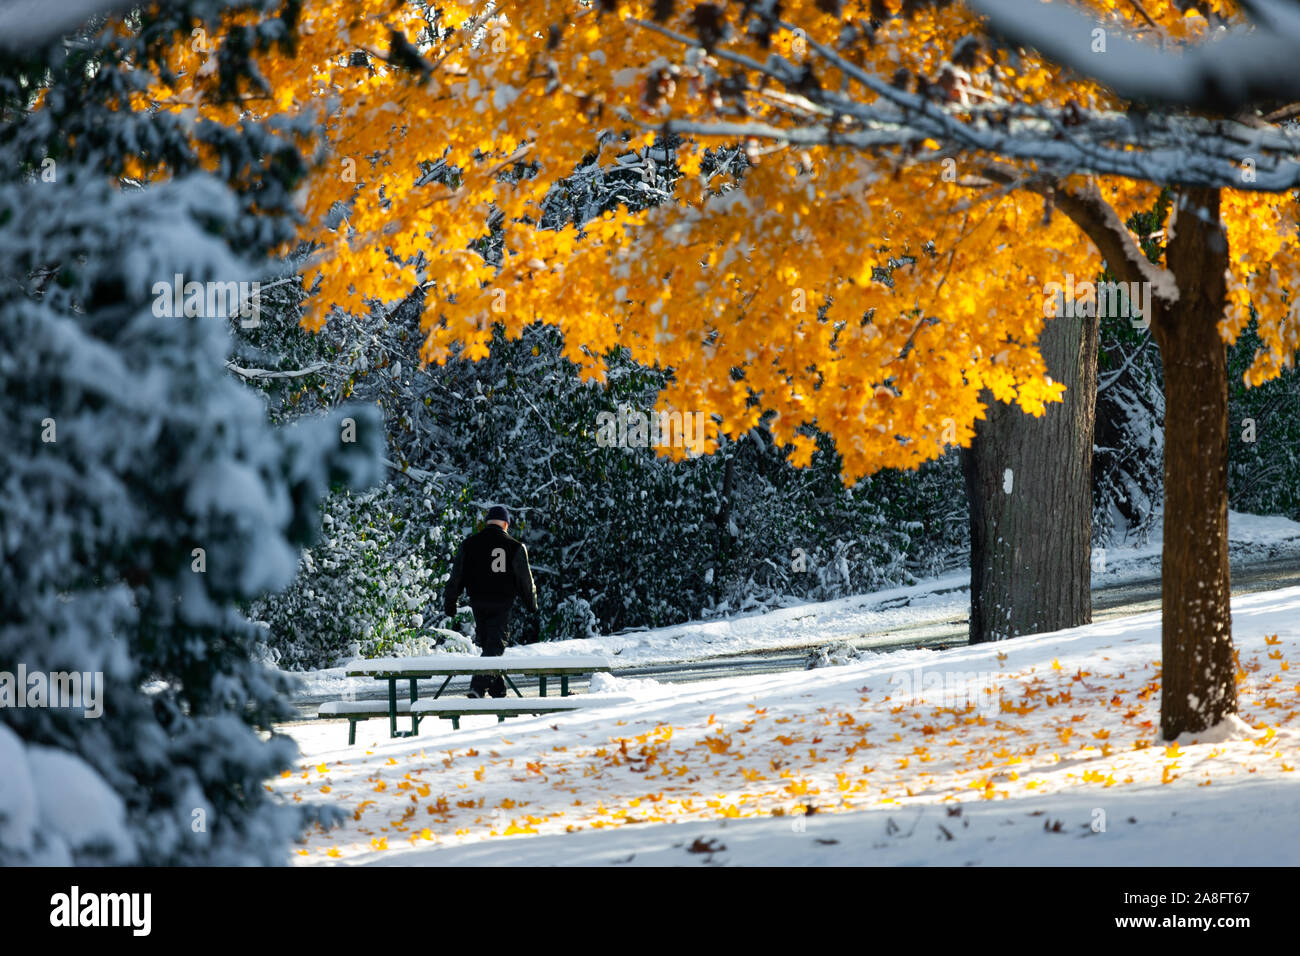 London, Canada - November 8, 2019. With most trees still full of leaves, Londoners walk through Springbank Park after an early snow fall. Stock Photo